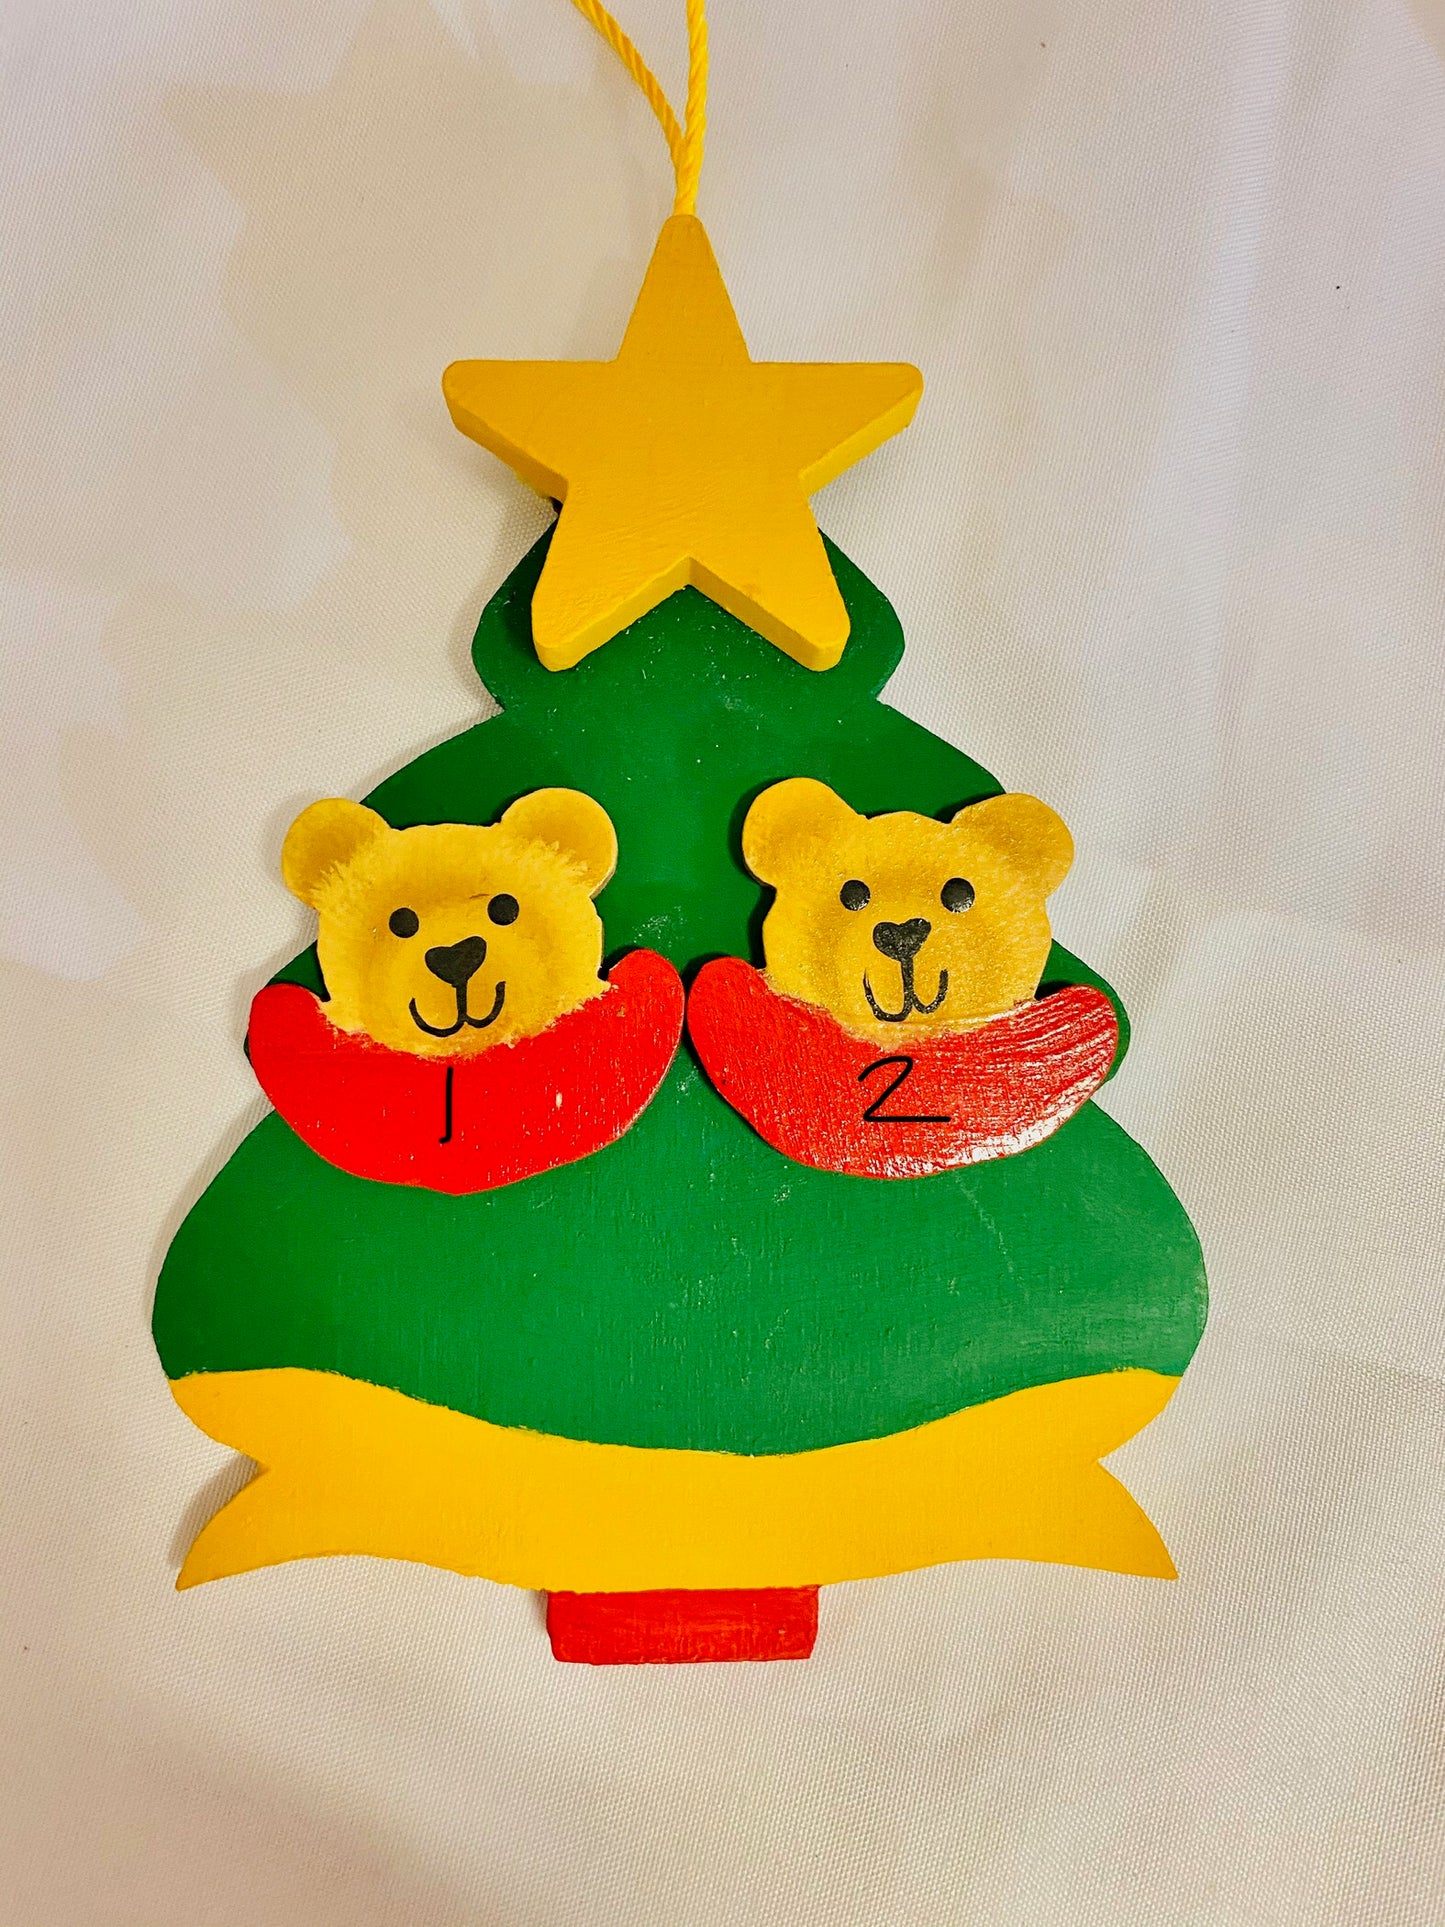 Personalized Ornament  2 Bear Faces on a Christmas Tree 4.5" x 3.5"